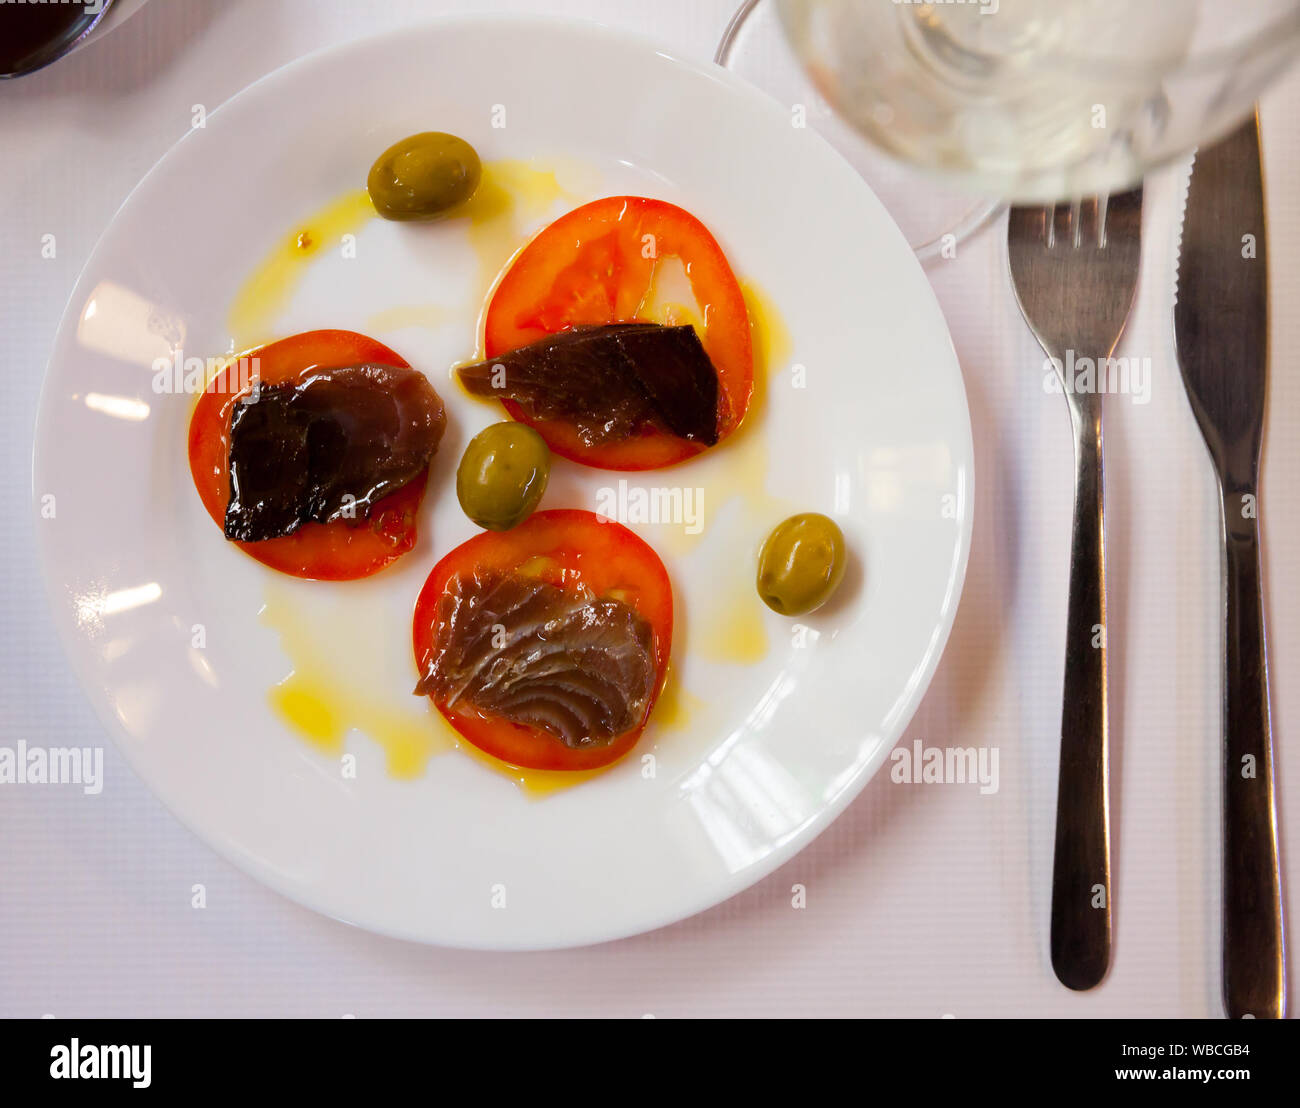 Top view of delicious andalusian tapa of fresh sliced sarda served with tomato, sauce and green olives on white plate Stock Photo